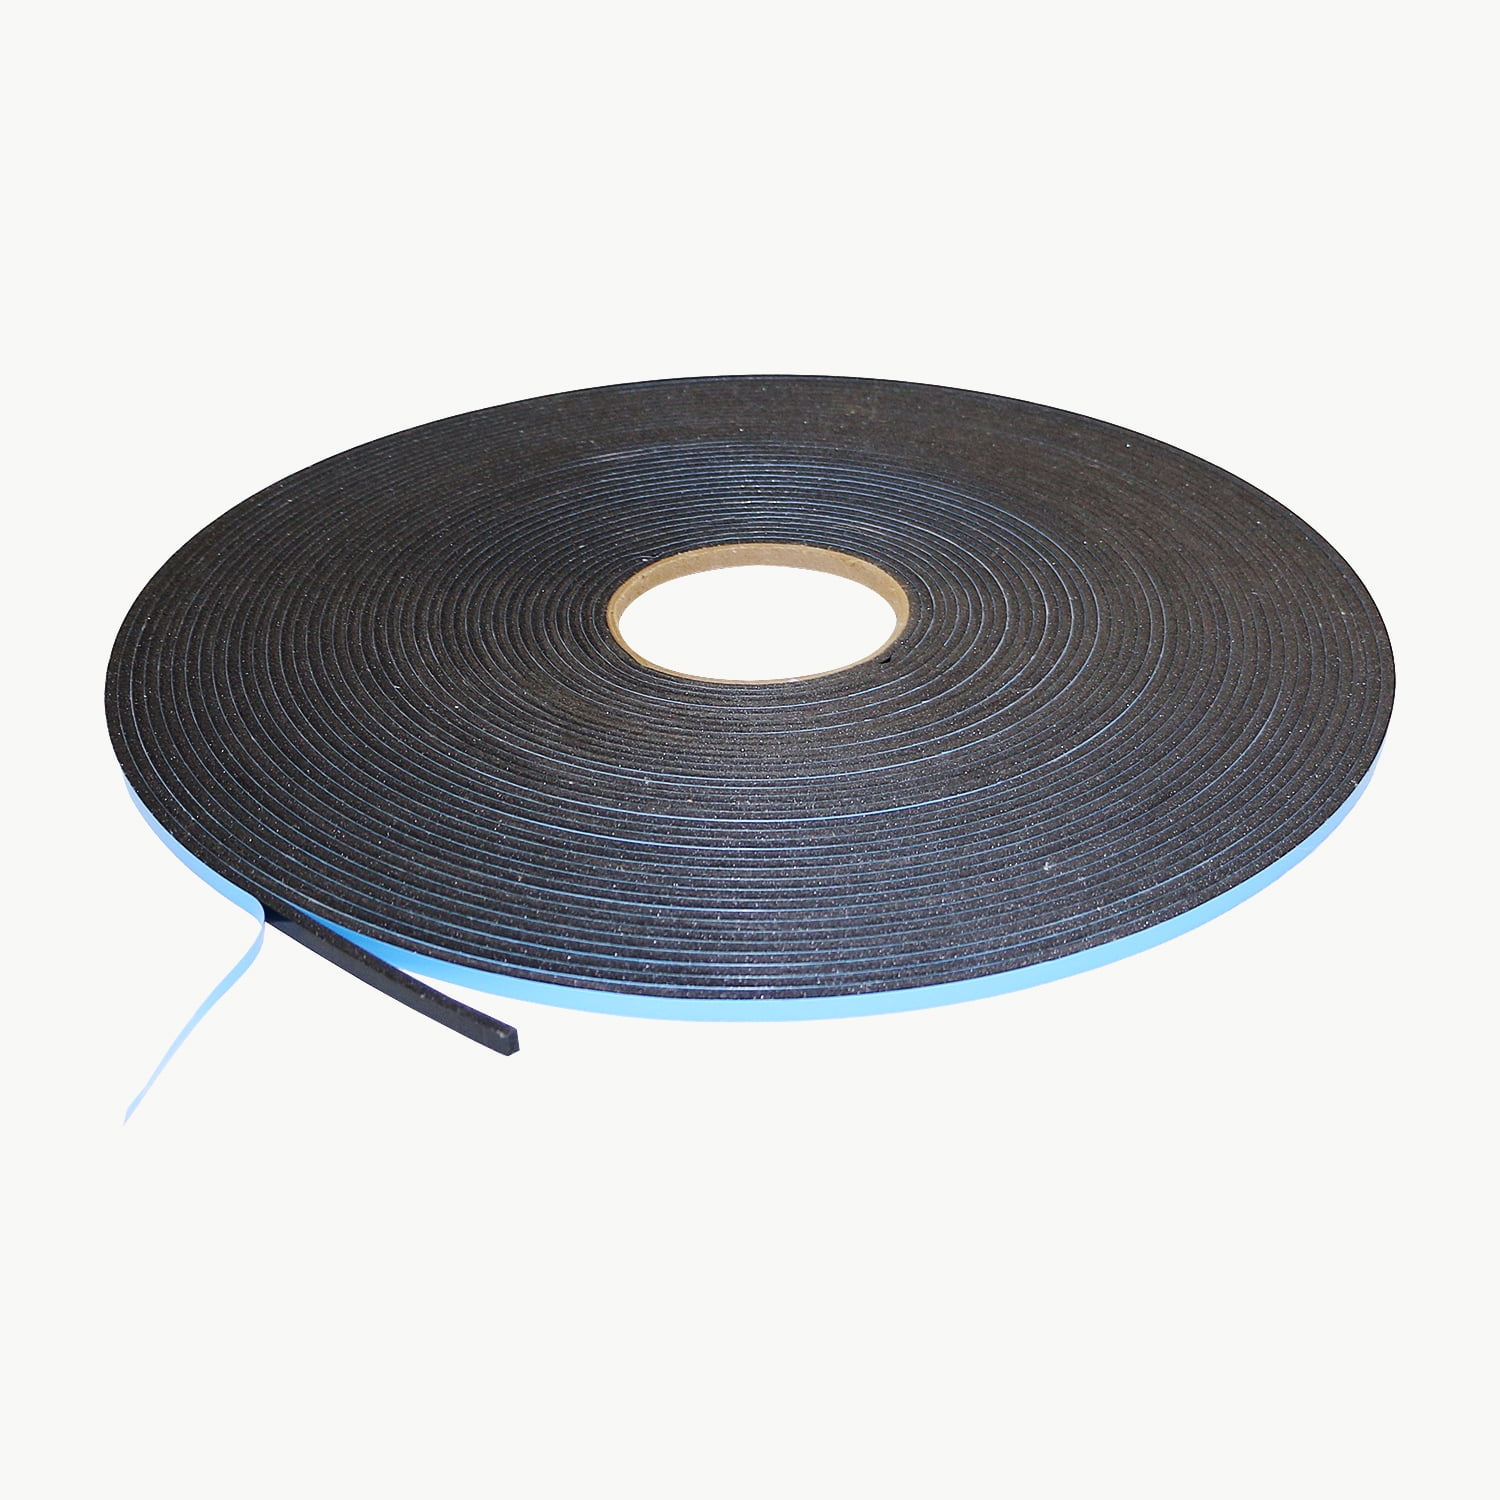 Black J.V 1/8 Thick x 3/8 x 75 ft Converting DC-WGT-01/BLK03825013 JVCC DC-WGT-01 Double Coated Window Glazing Tape 